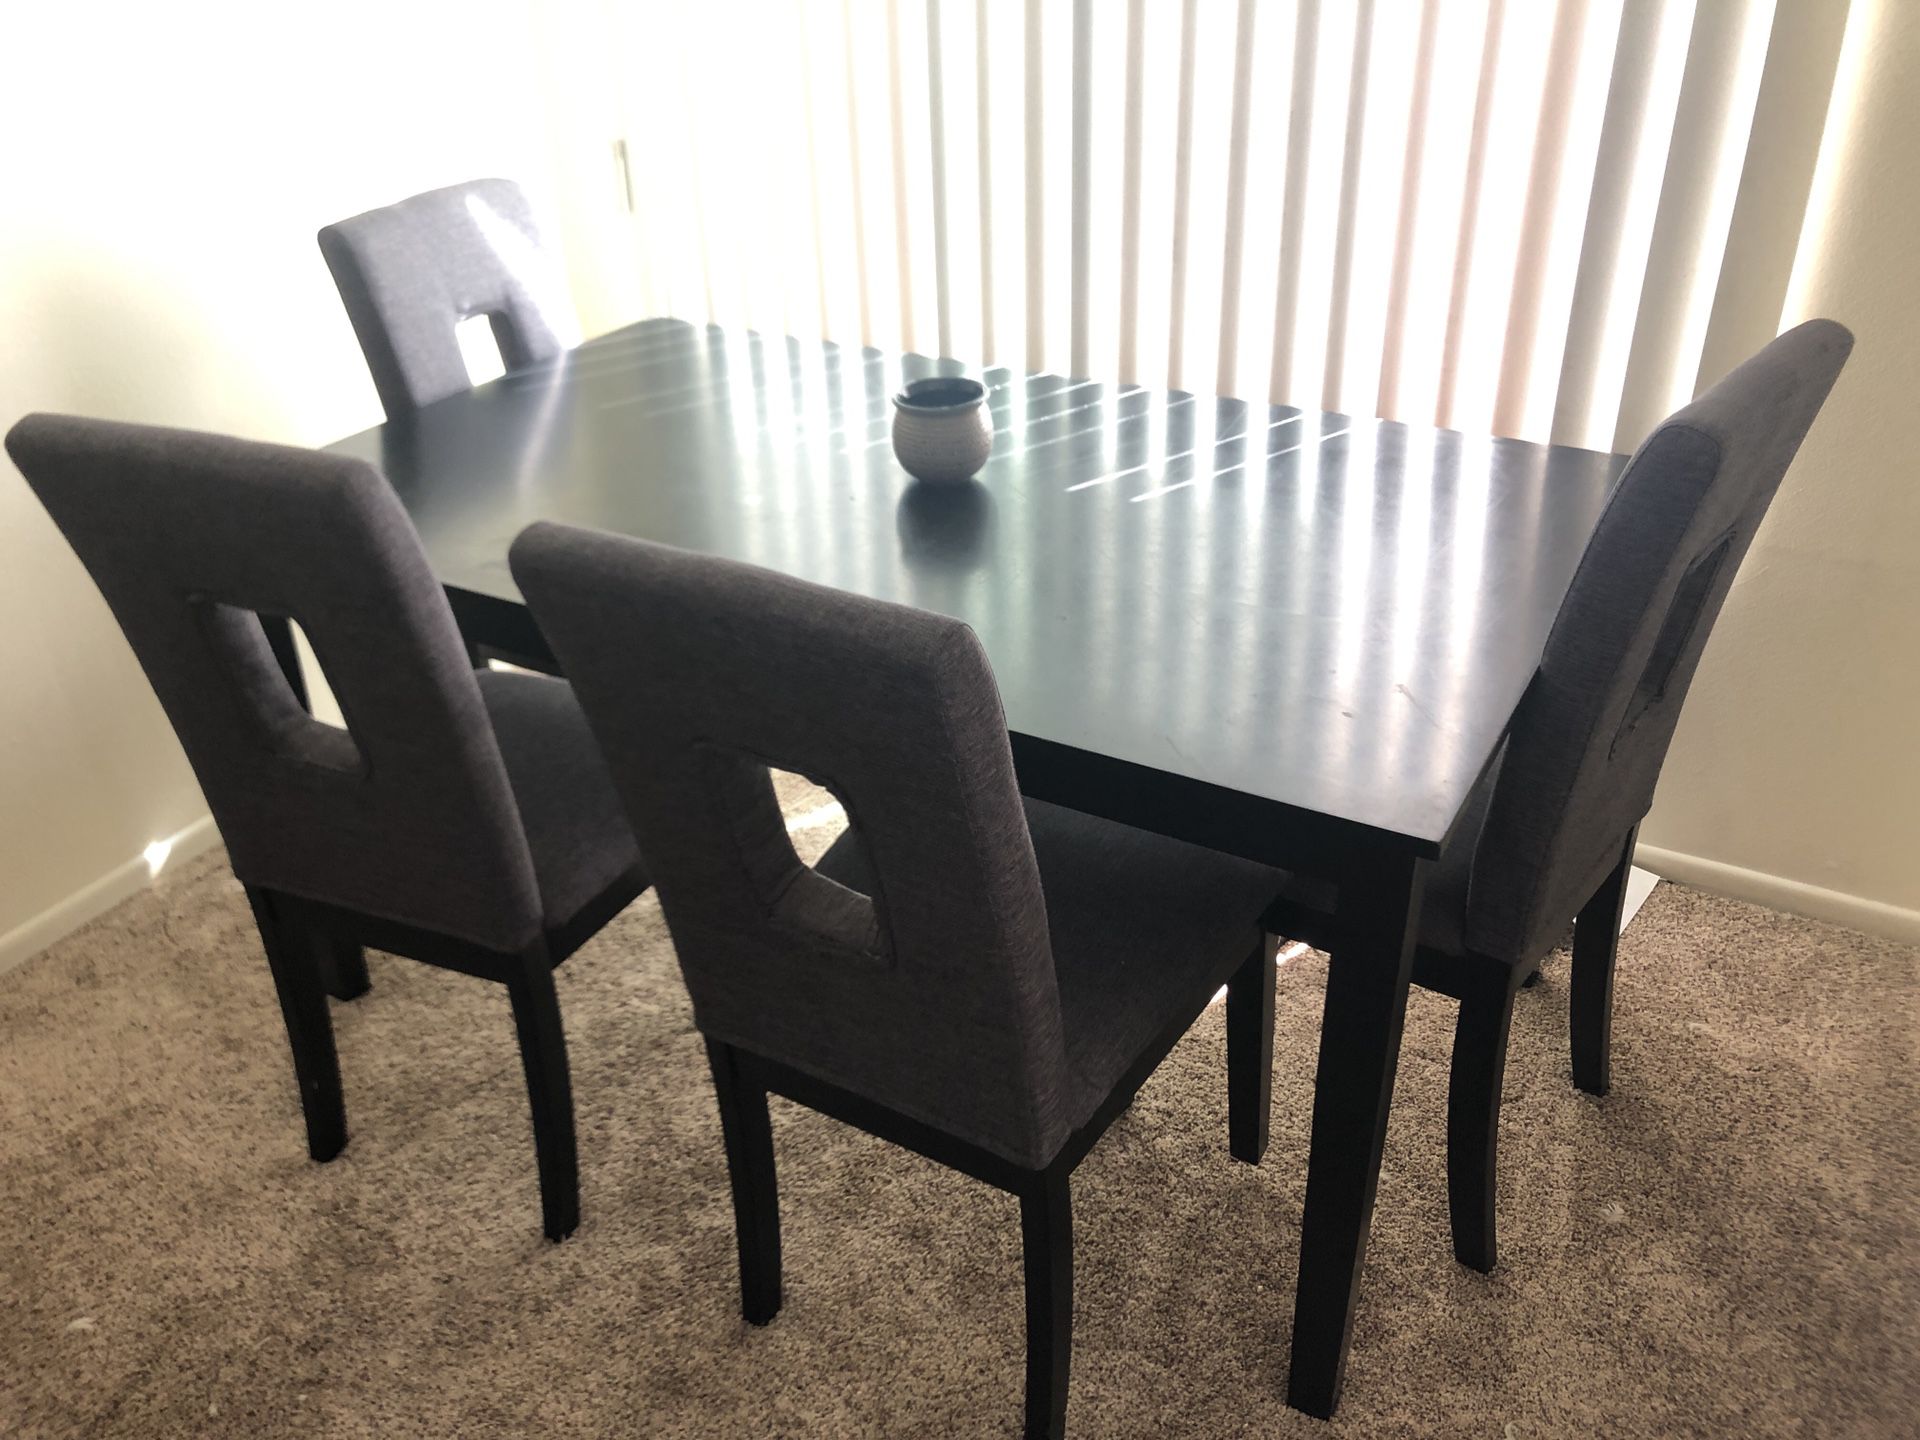 Black kitchen table with grey and black chairs